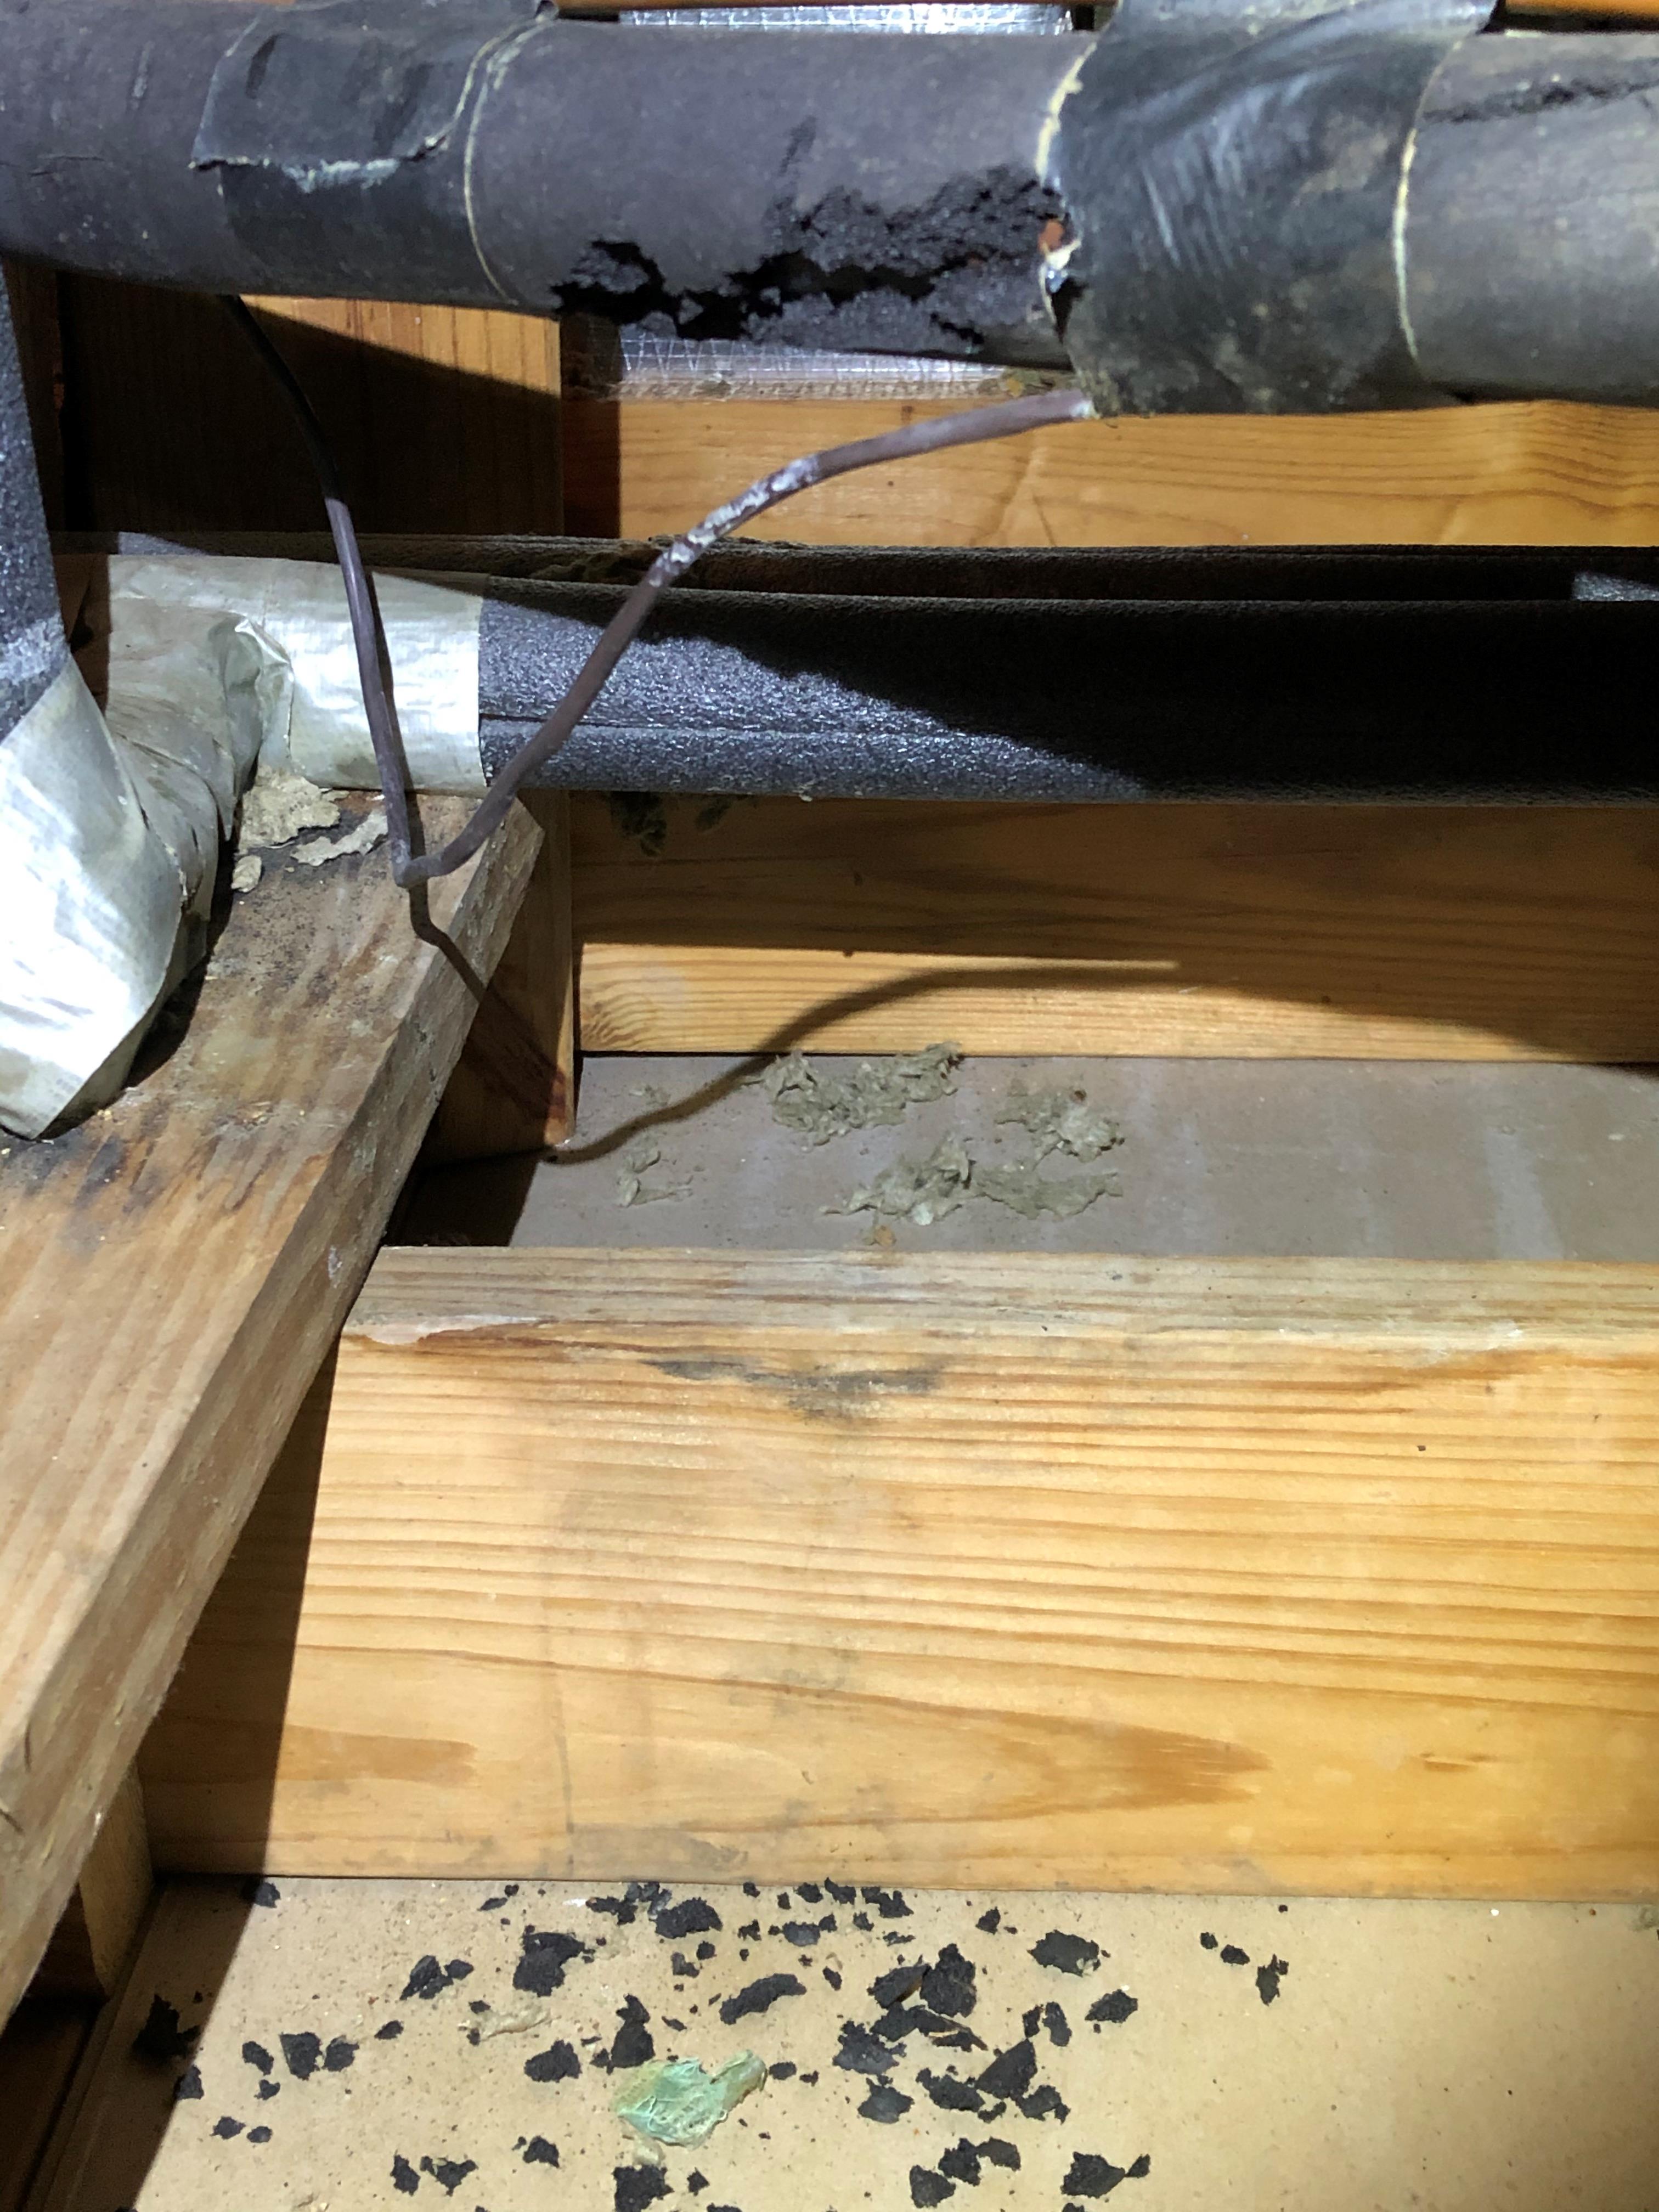 Signs of Rodents in Attic